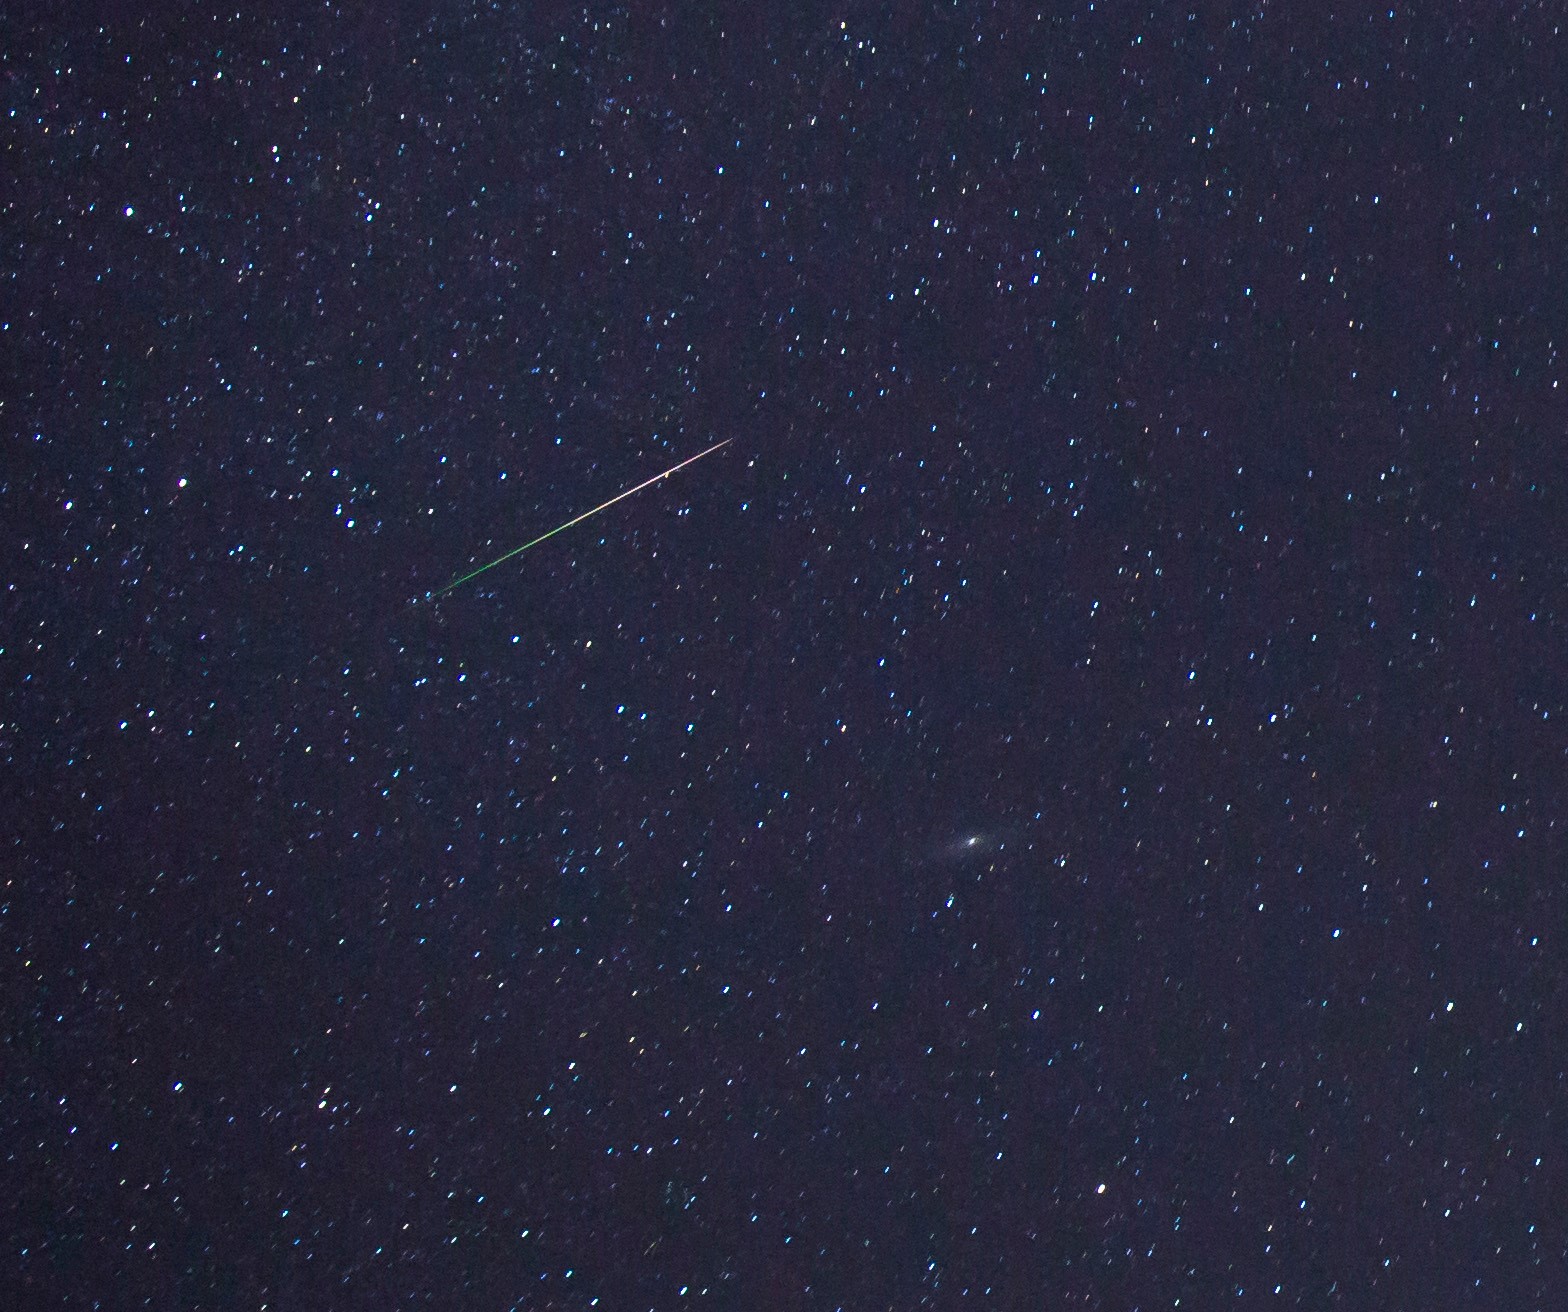 Perseid meteor near the Andromeda galaxy, August 13, 2015. Canon 6D with 16-35 f/4 lens wide open at 16mm, 30 sec exp, ISO800.